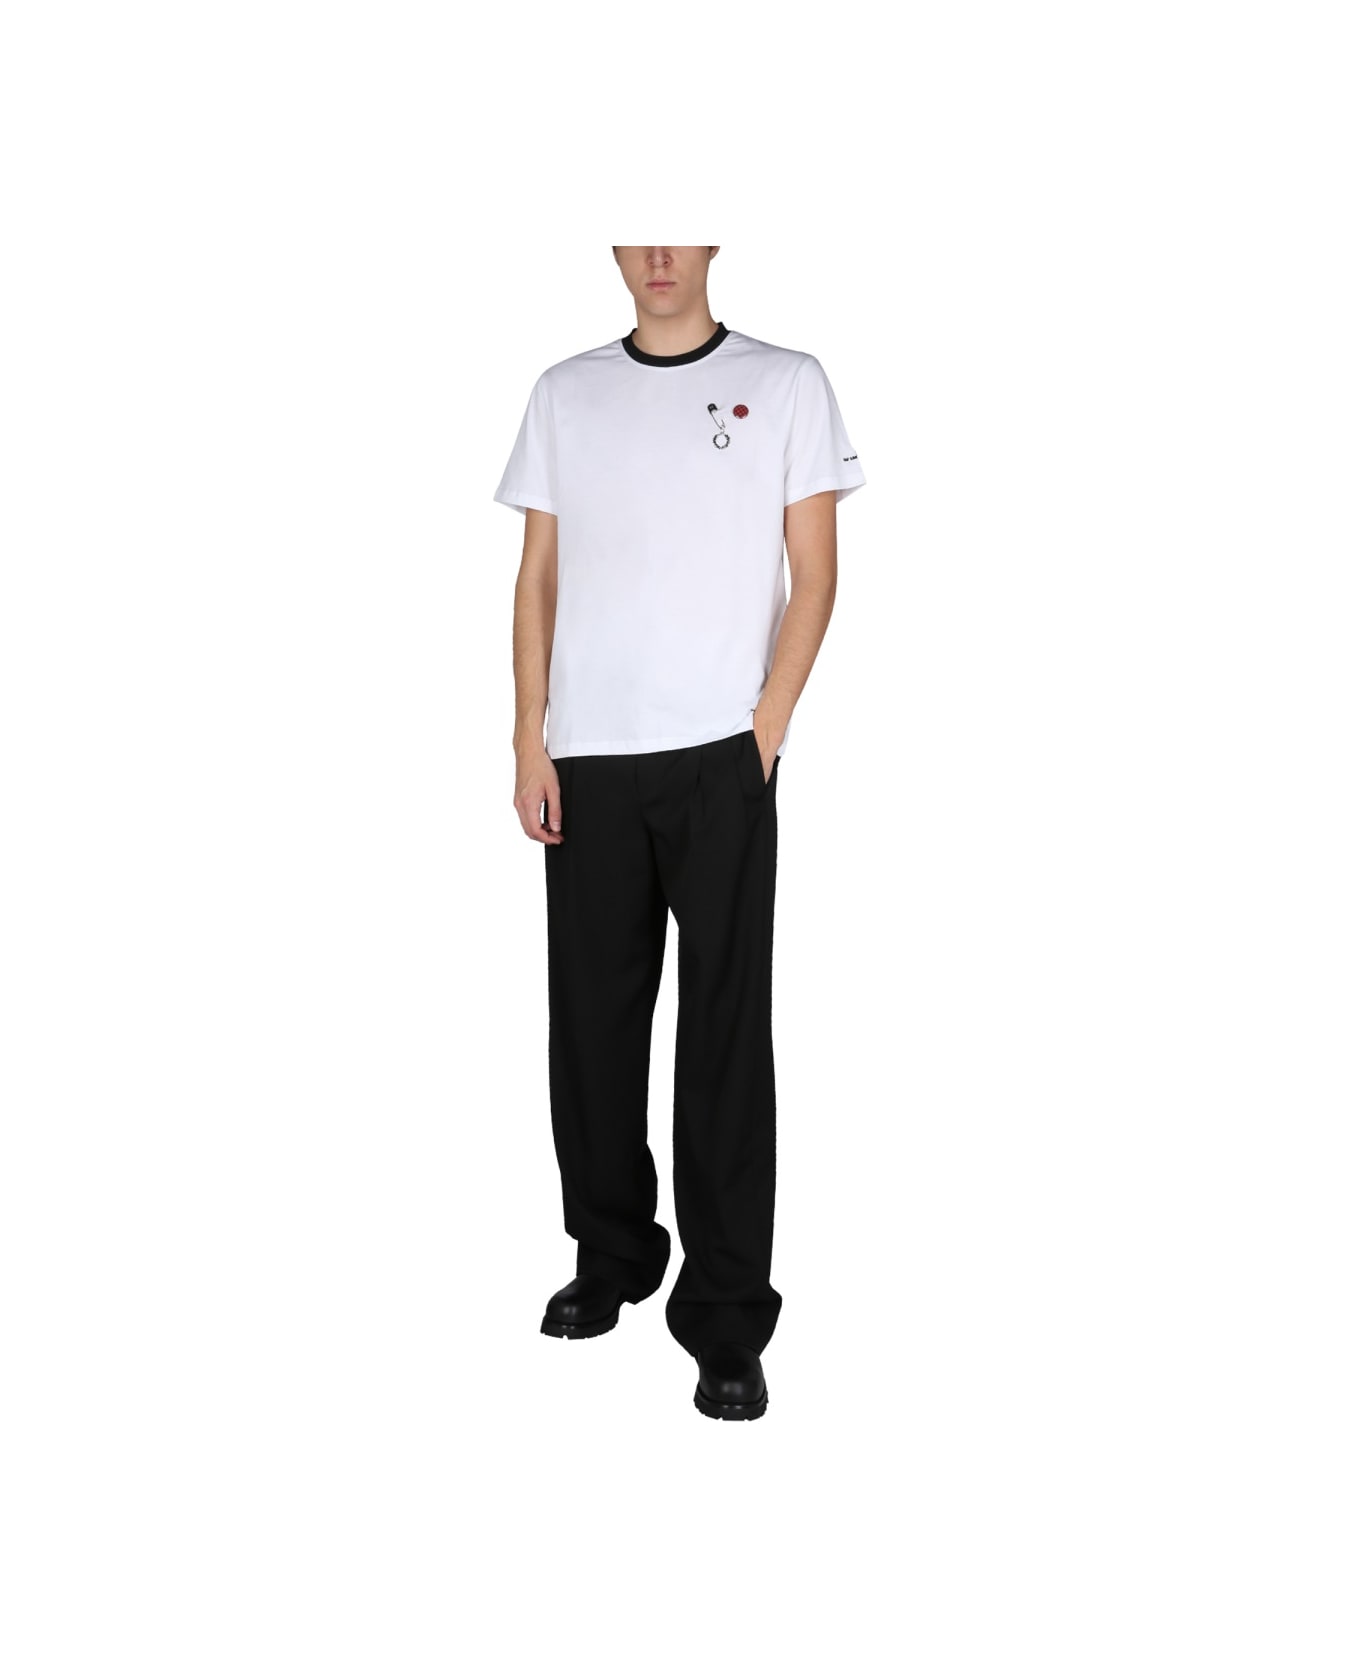 Fred Perry by Raf Simons Slim Fit T-shirt - WHITE シャツ